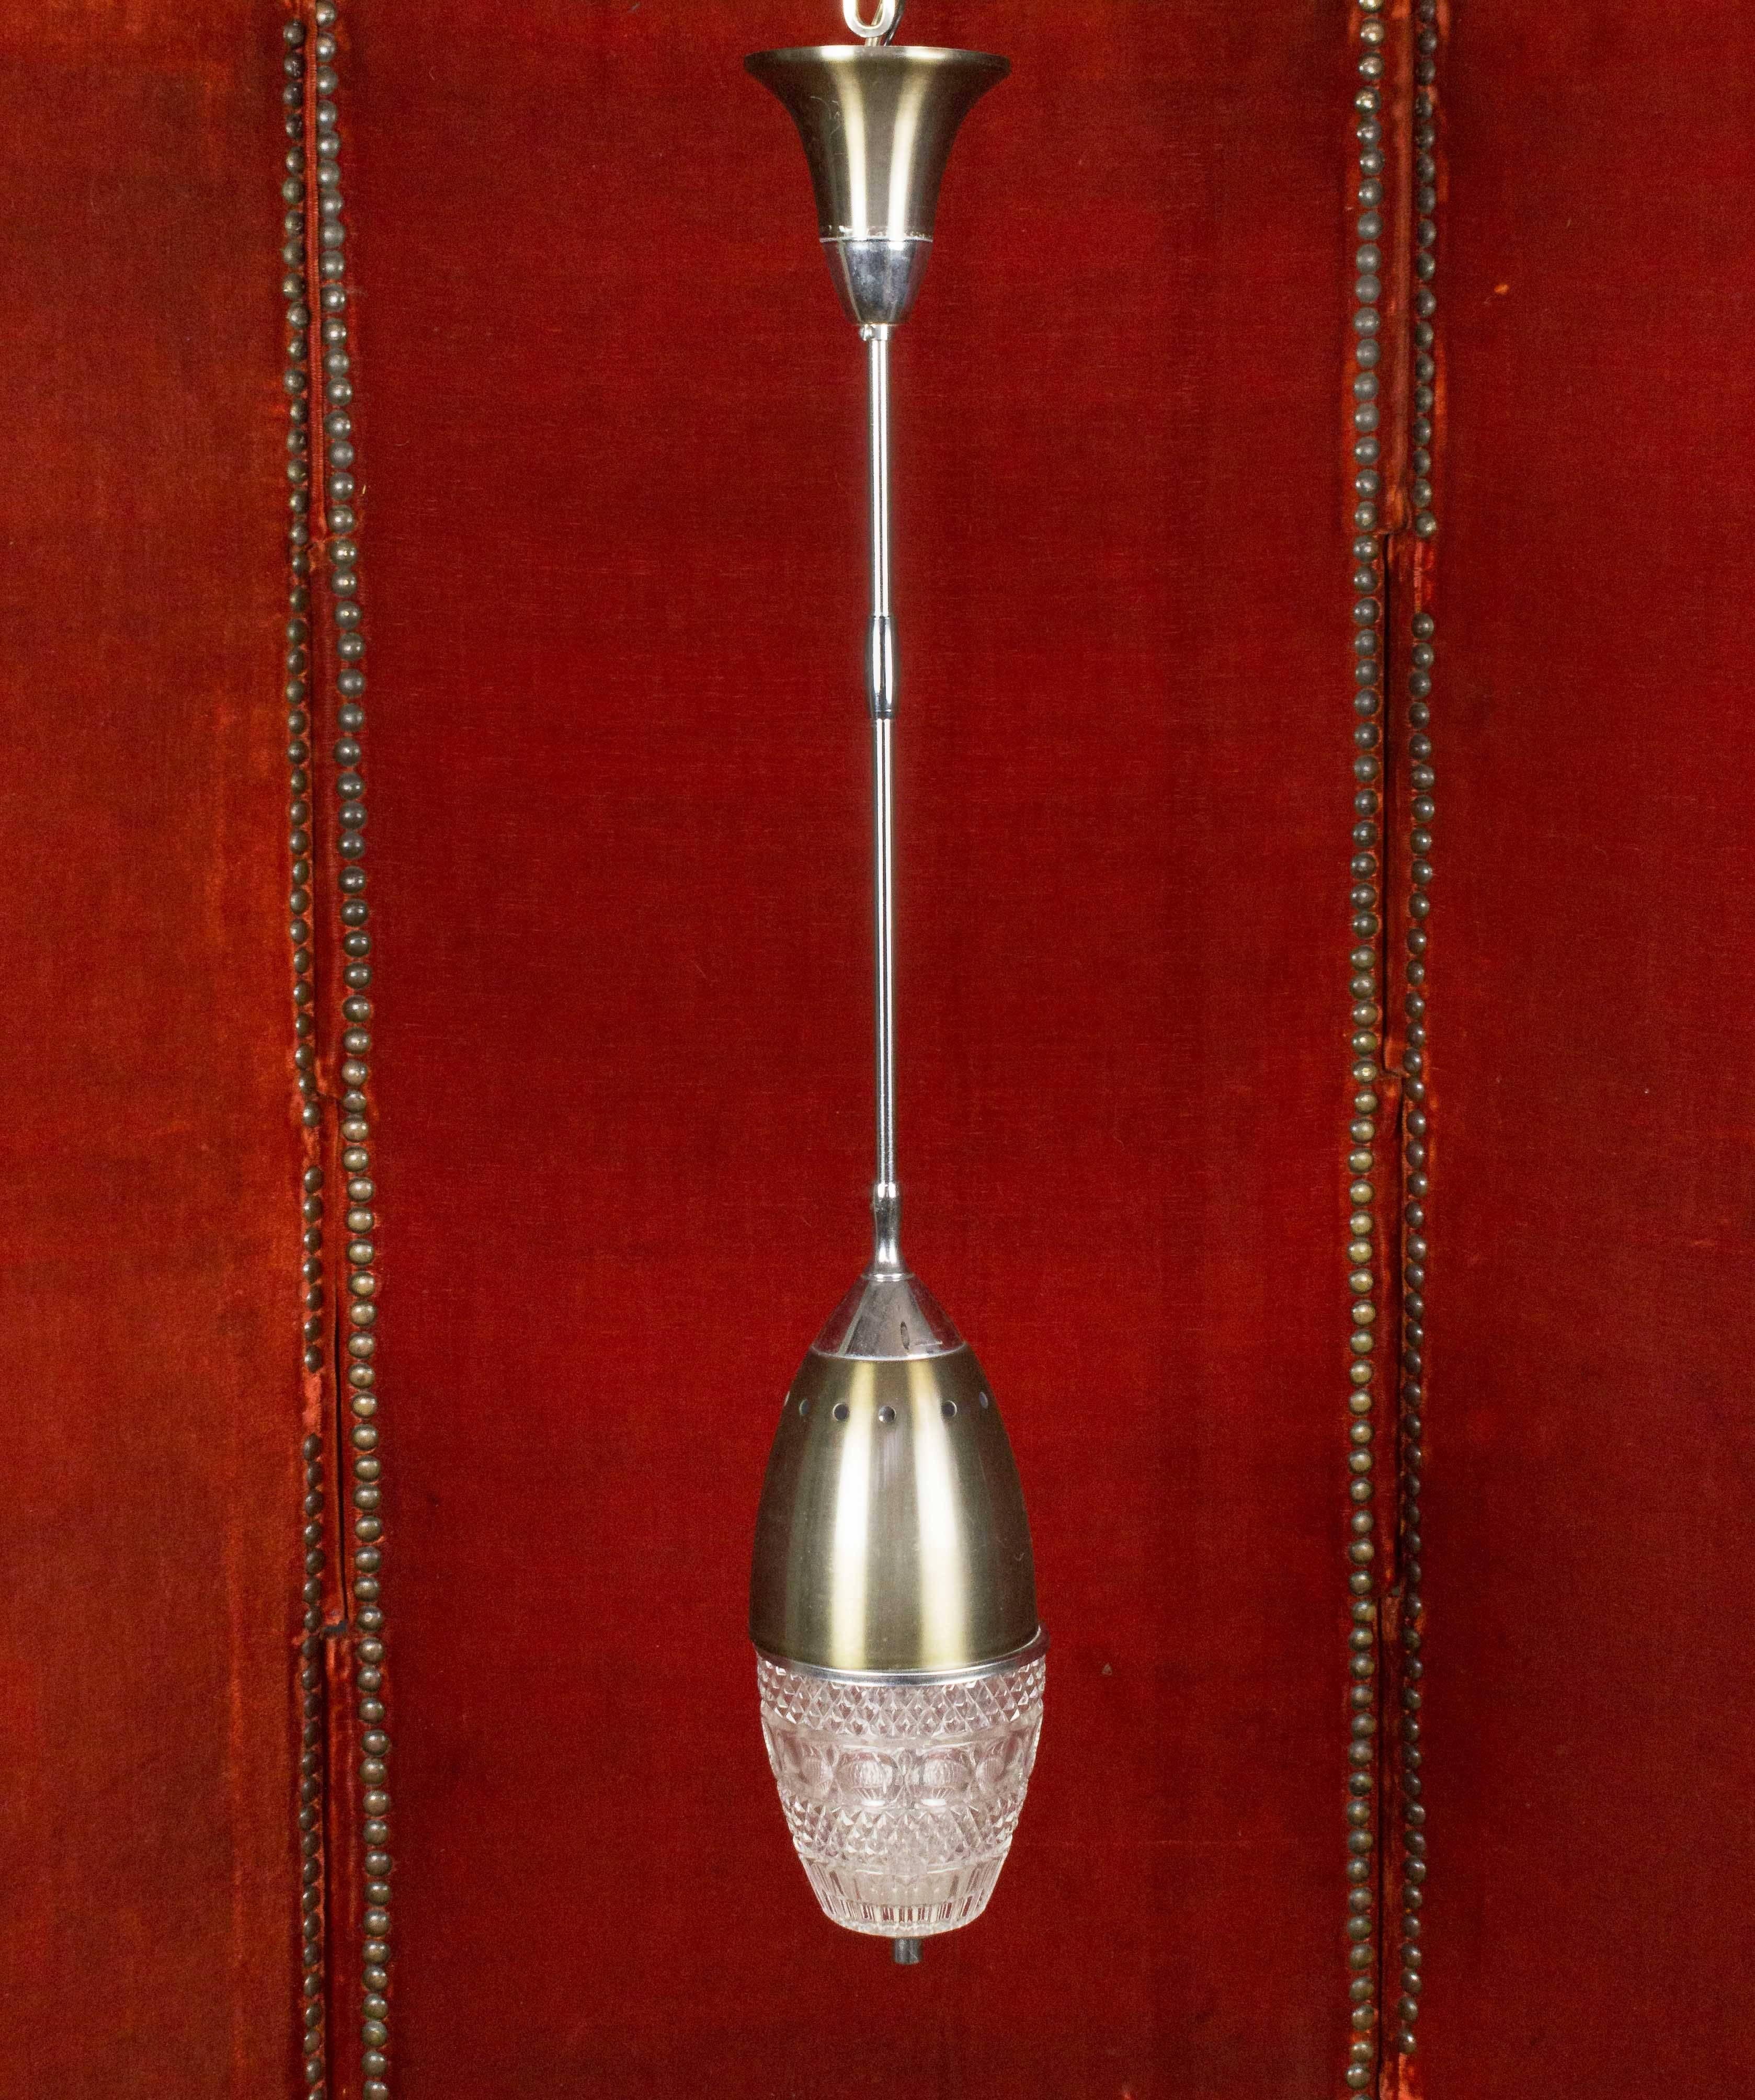 A unique pair of Italian glass and stainless steel hanging pendants, circa 1960. Instantly elevate the style of any room with this gorgeous pair of hanging pendants. Expertly designed to be eye-catching as well as durable, these hanging pendants are